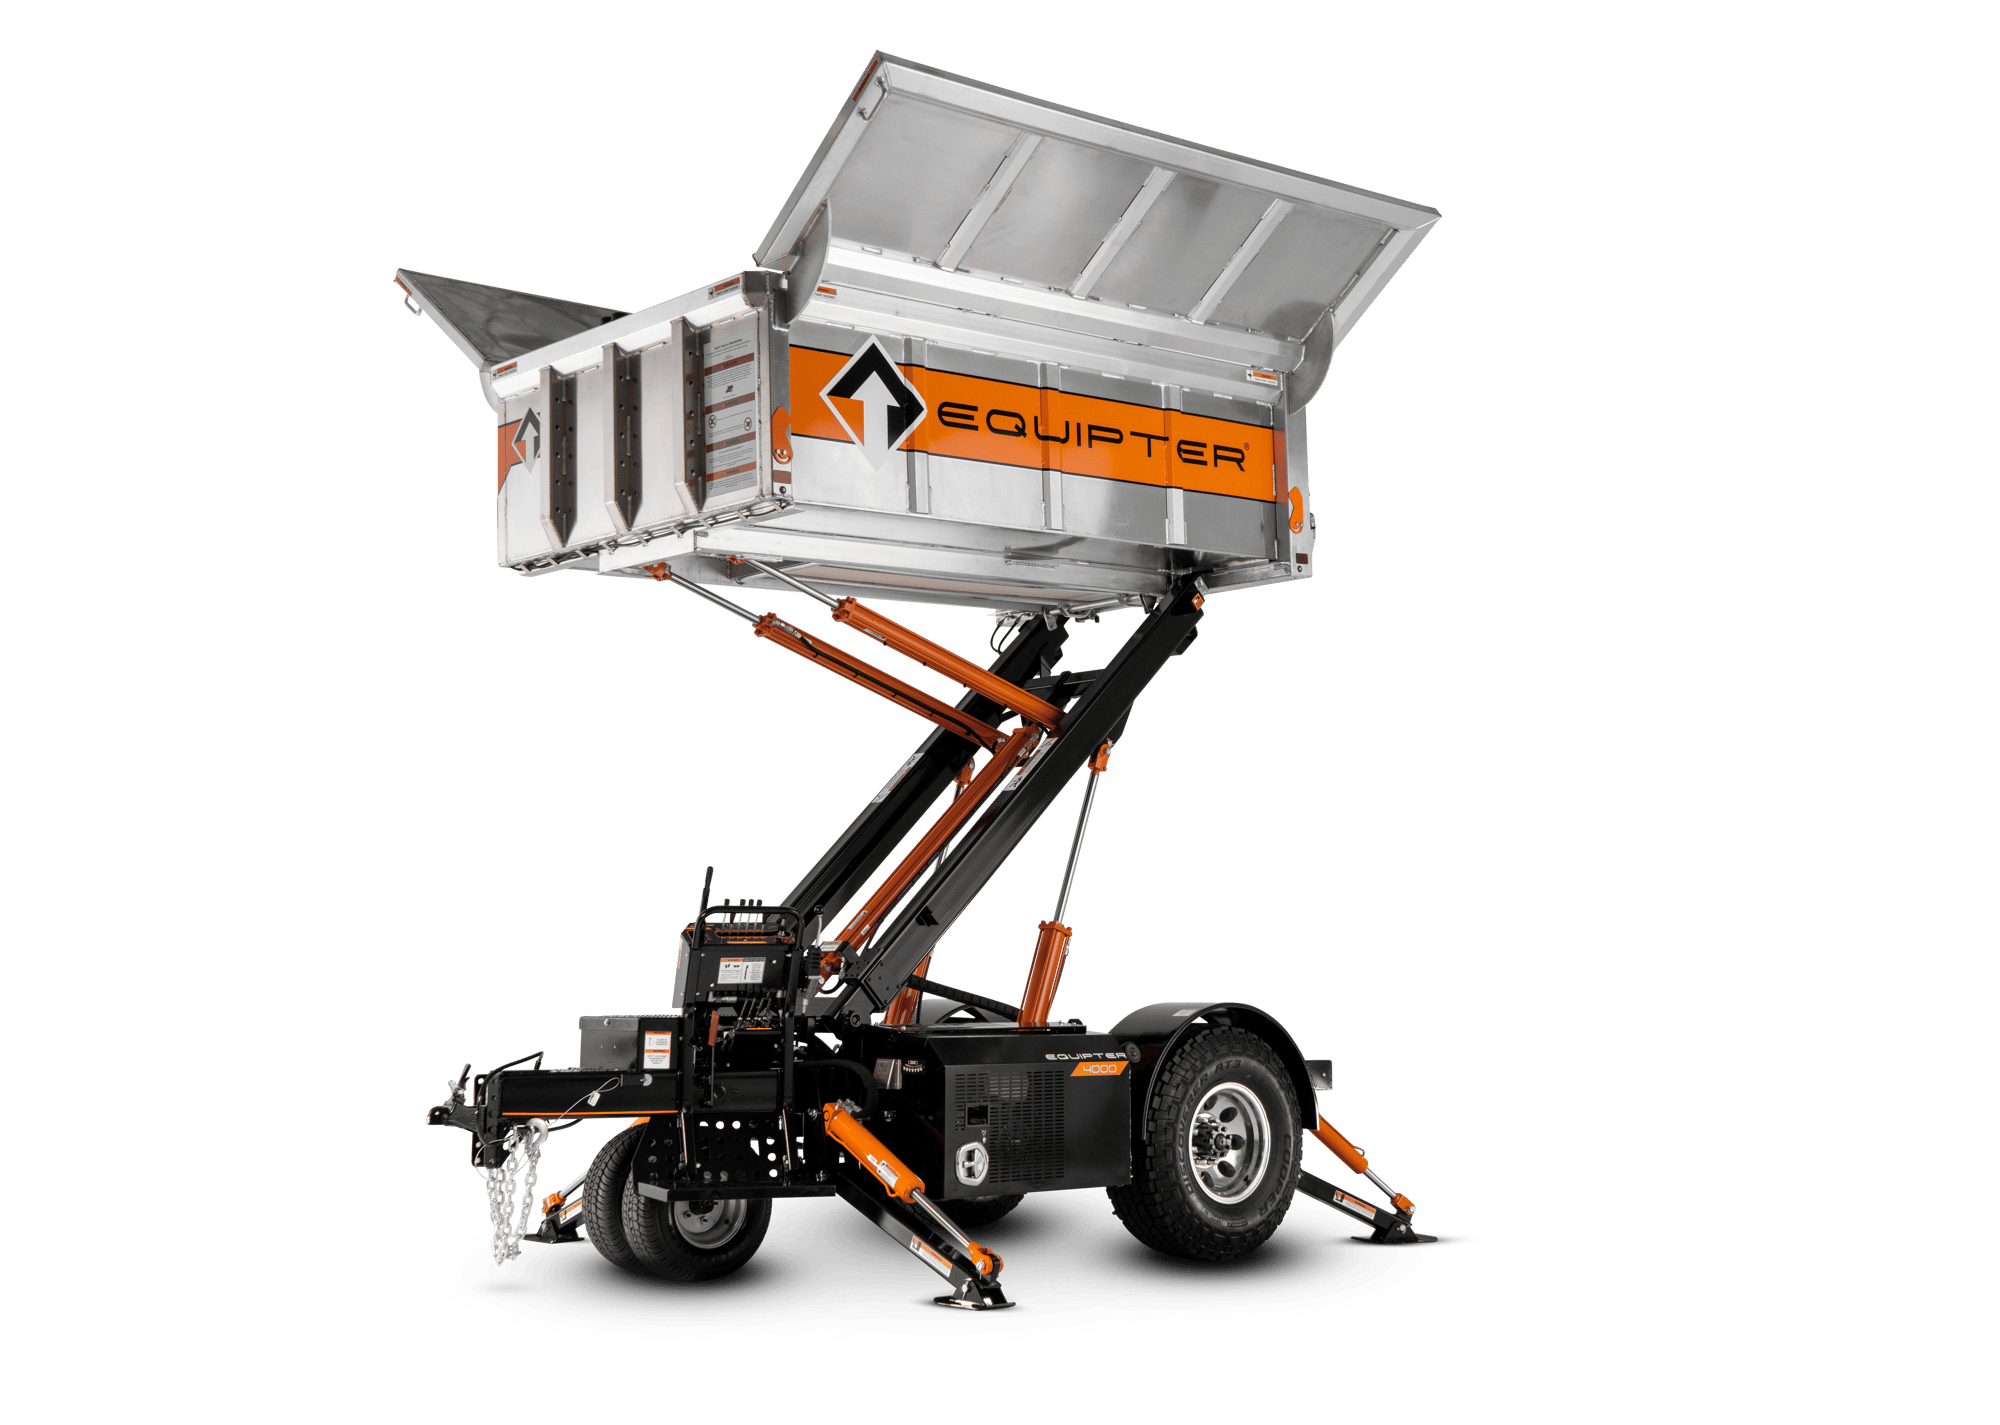 The Equipter 4000 Lifted